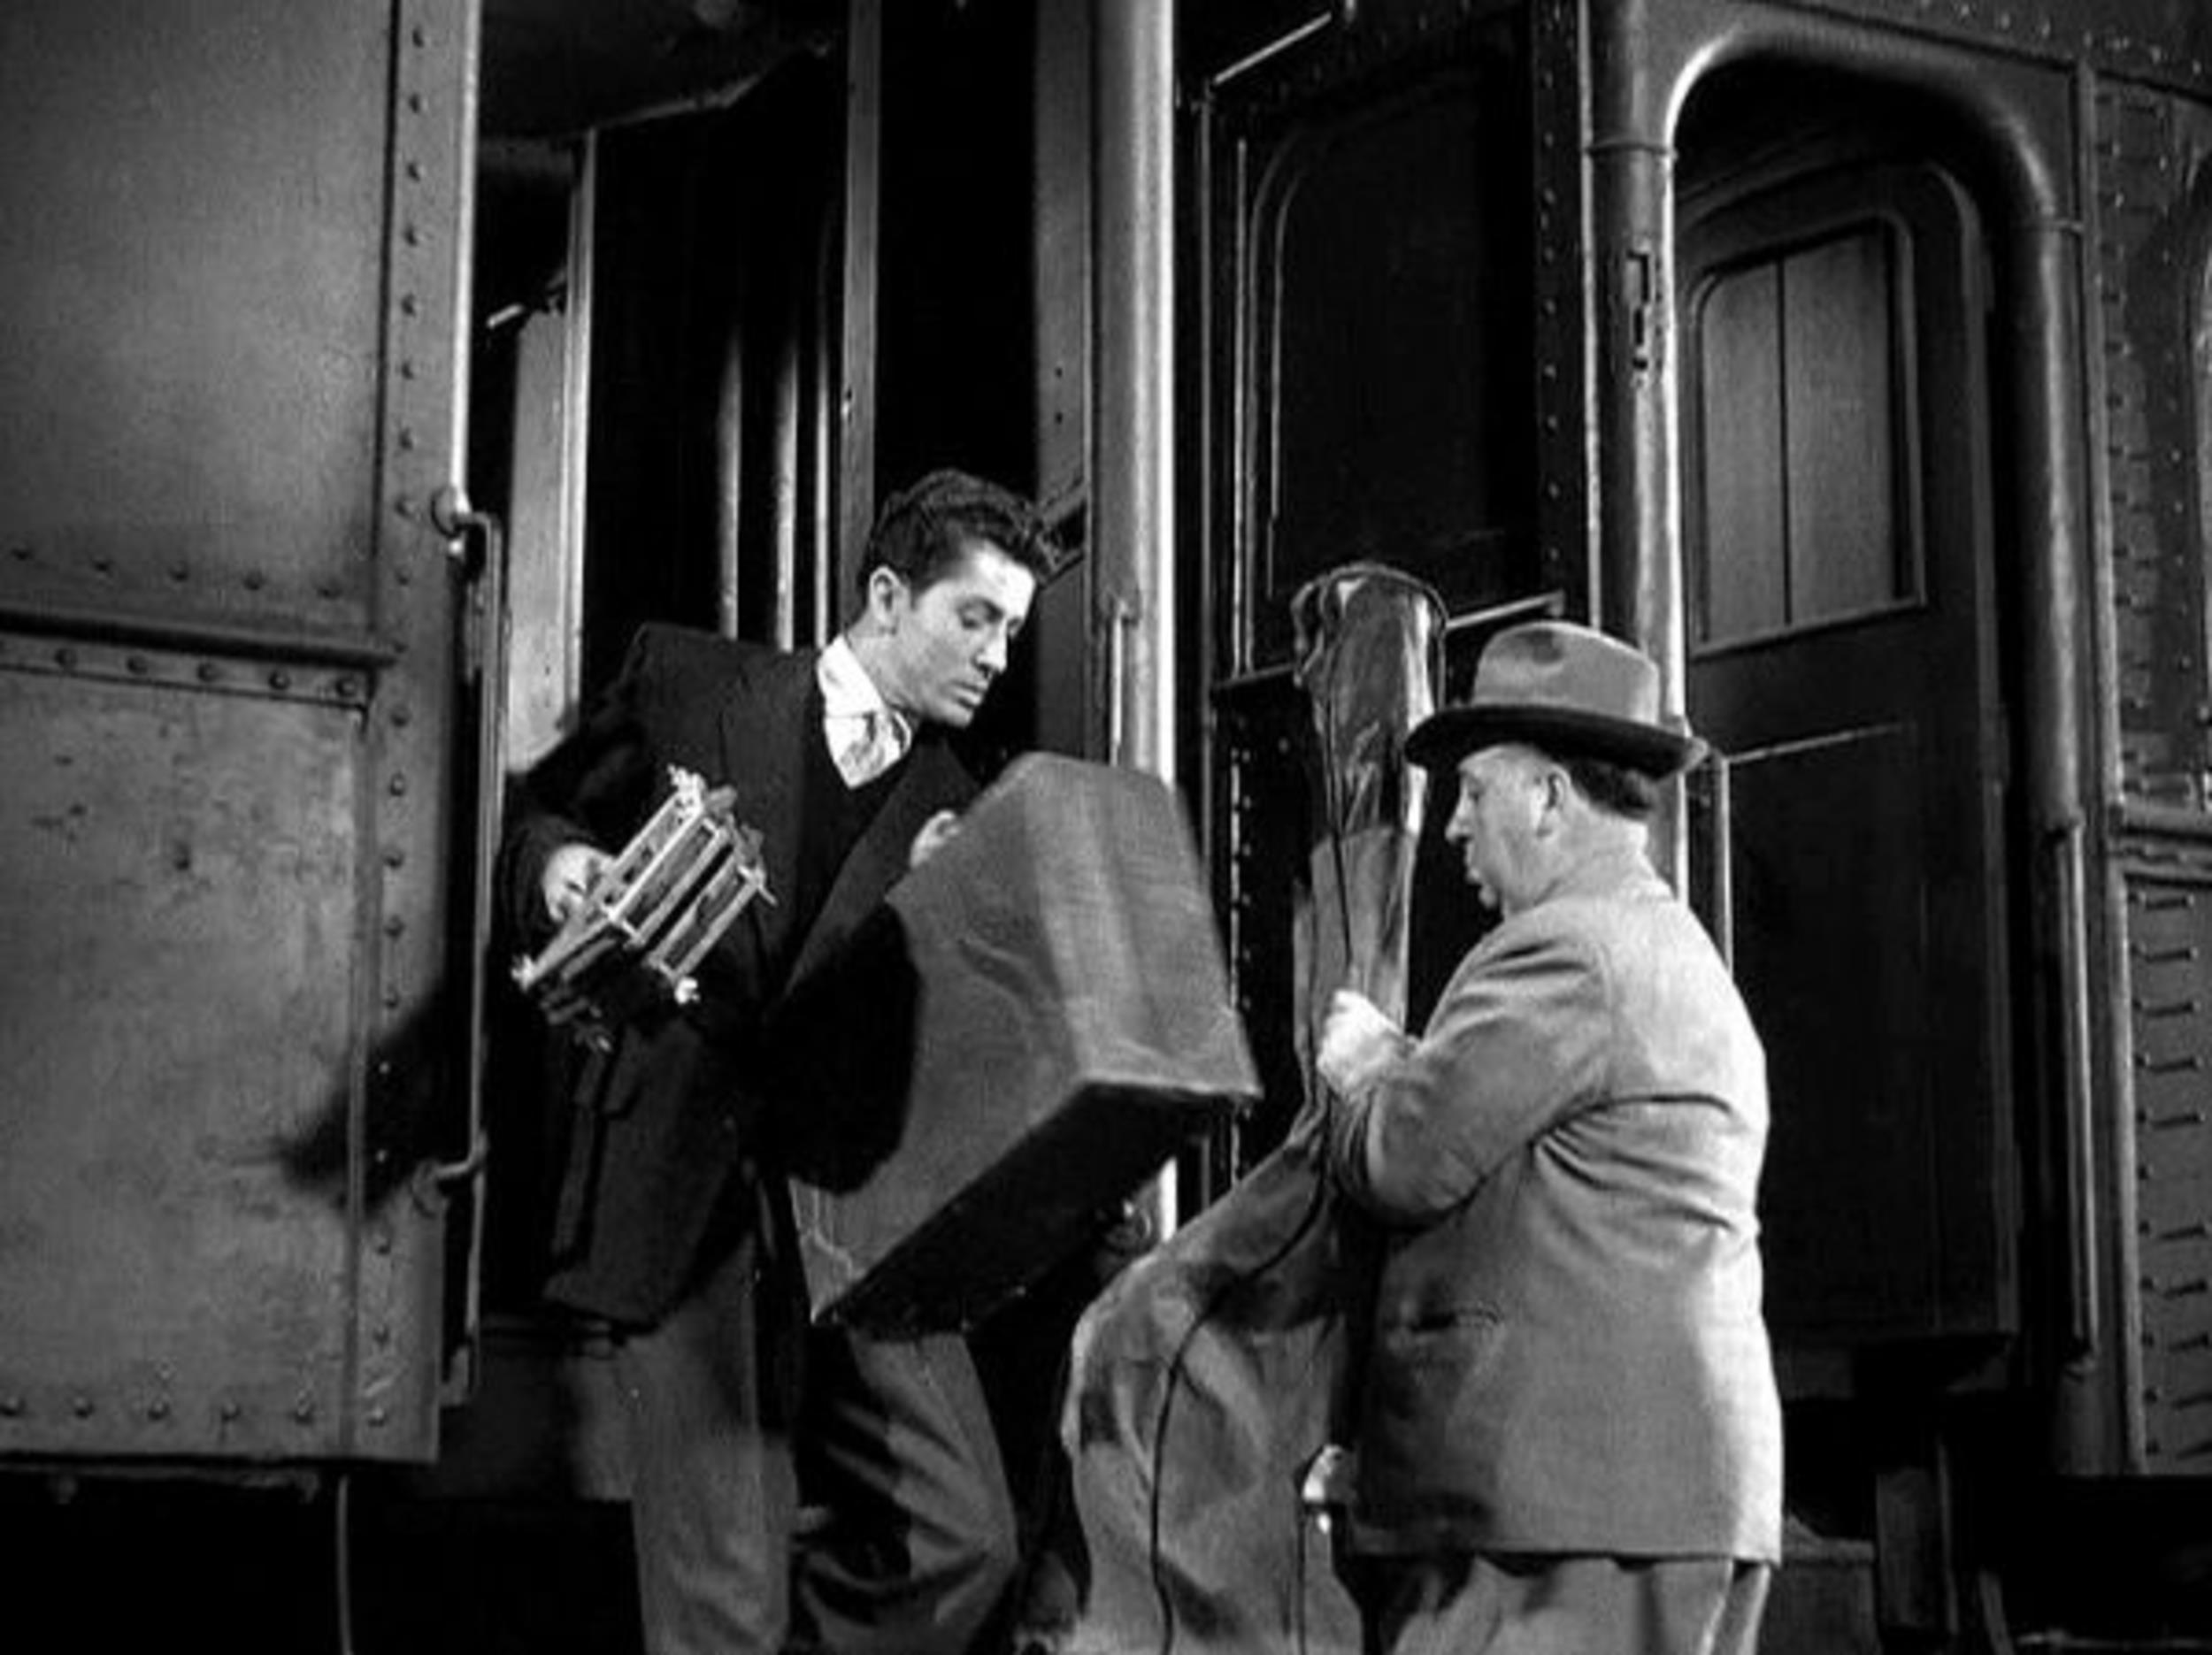 <p>You’ll never guess where Hitchcock has his cameo. Yep, it’s on the train. Or, rather, getting onto the train. The guy seemed to enjoy playing men carrying instruments with him. This time, it seems like he’s trying to board the train carrying a cello, or perhaps even a double bass.</p>